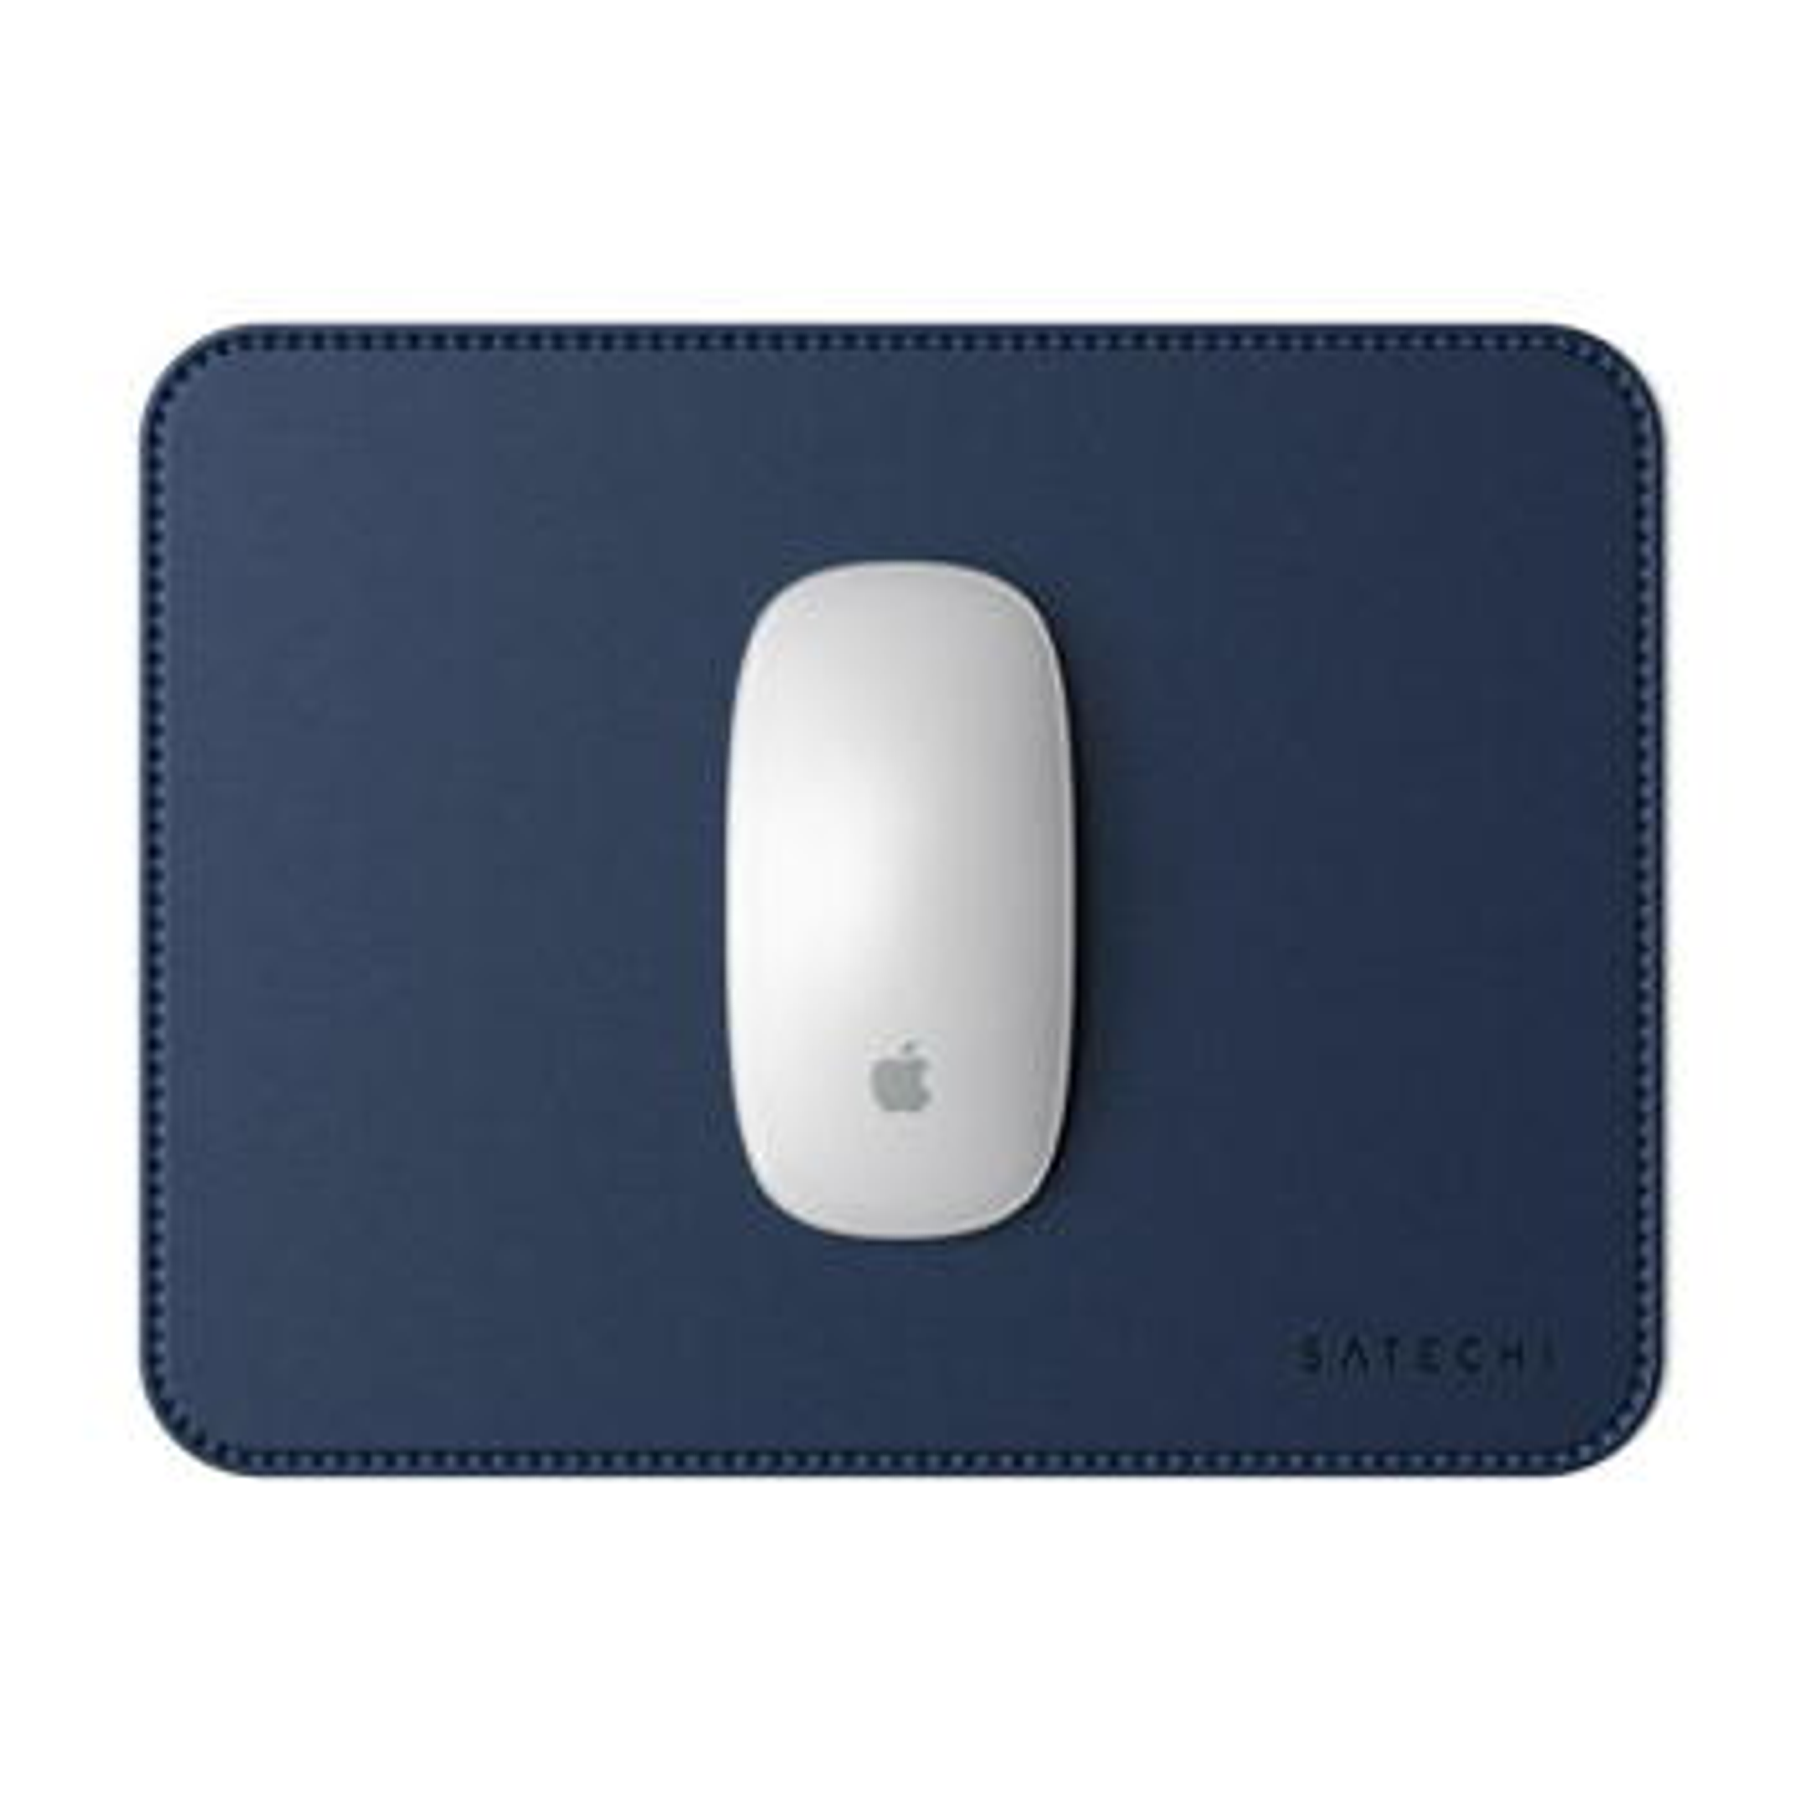 Satechi - Eco-Leather Mouse Pad (blue)